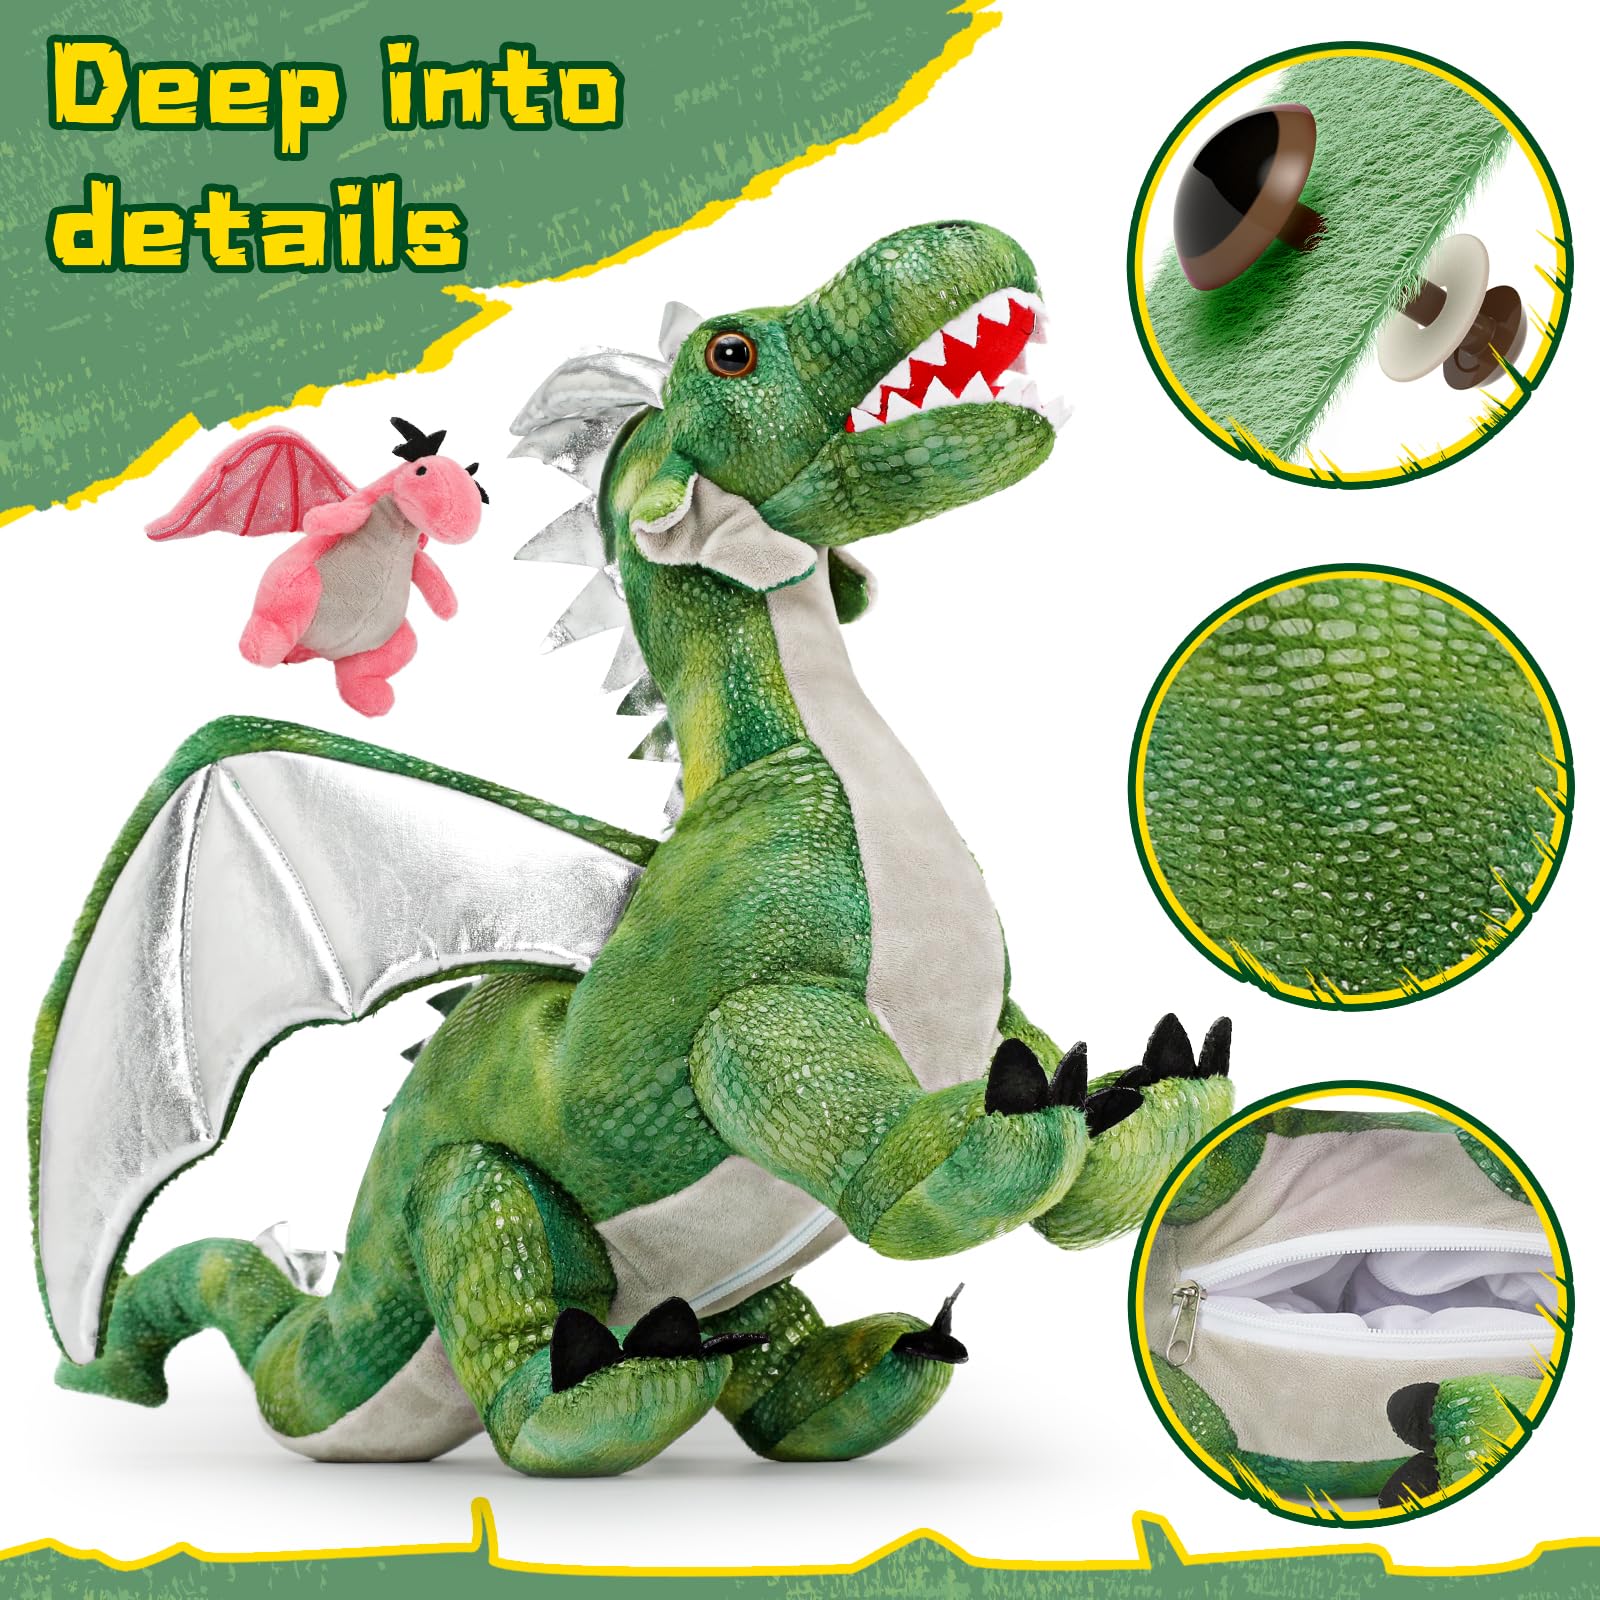 MorisMos Giant Dragon Stuffed Animal, Large Dragon Plush Toy with Baby Dragons Inside, Big Mommy Stuffed Dragon with Babies Set, Gifts for Kids, Boys on Christmas, Birthday (Green 21in)